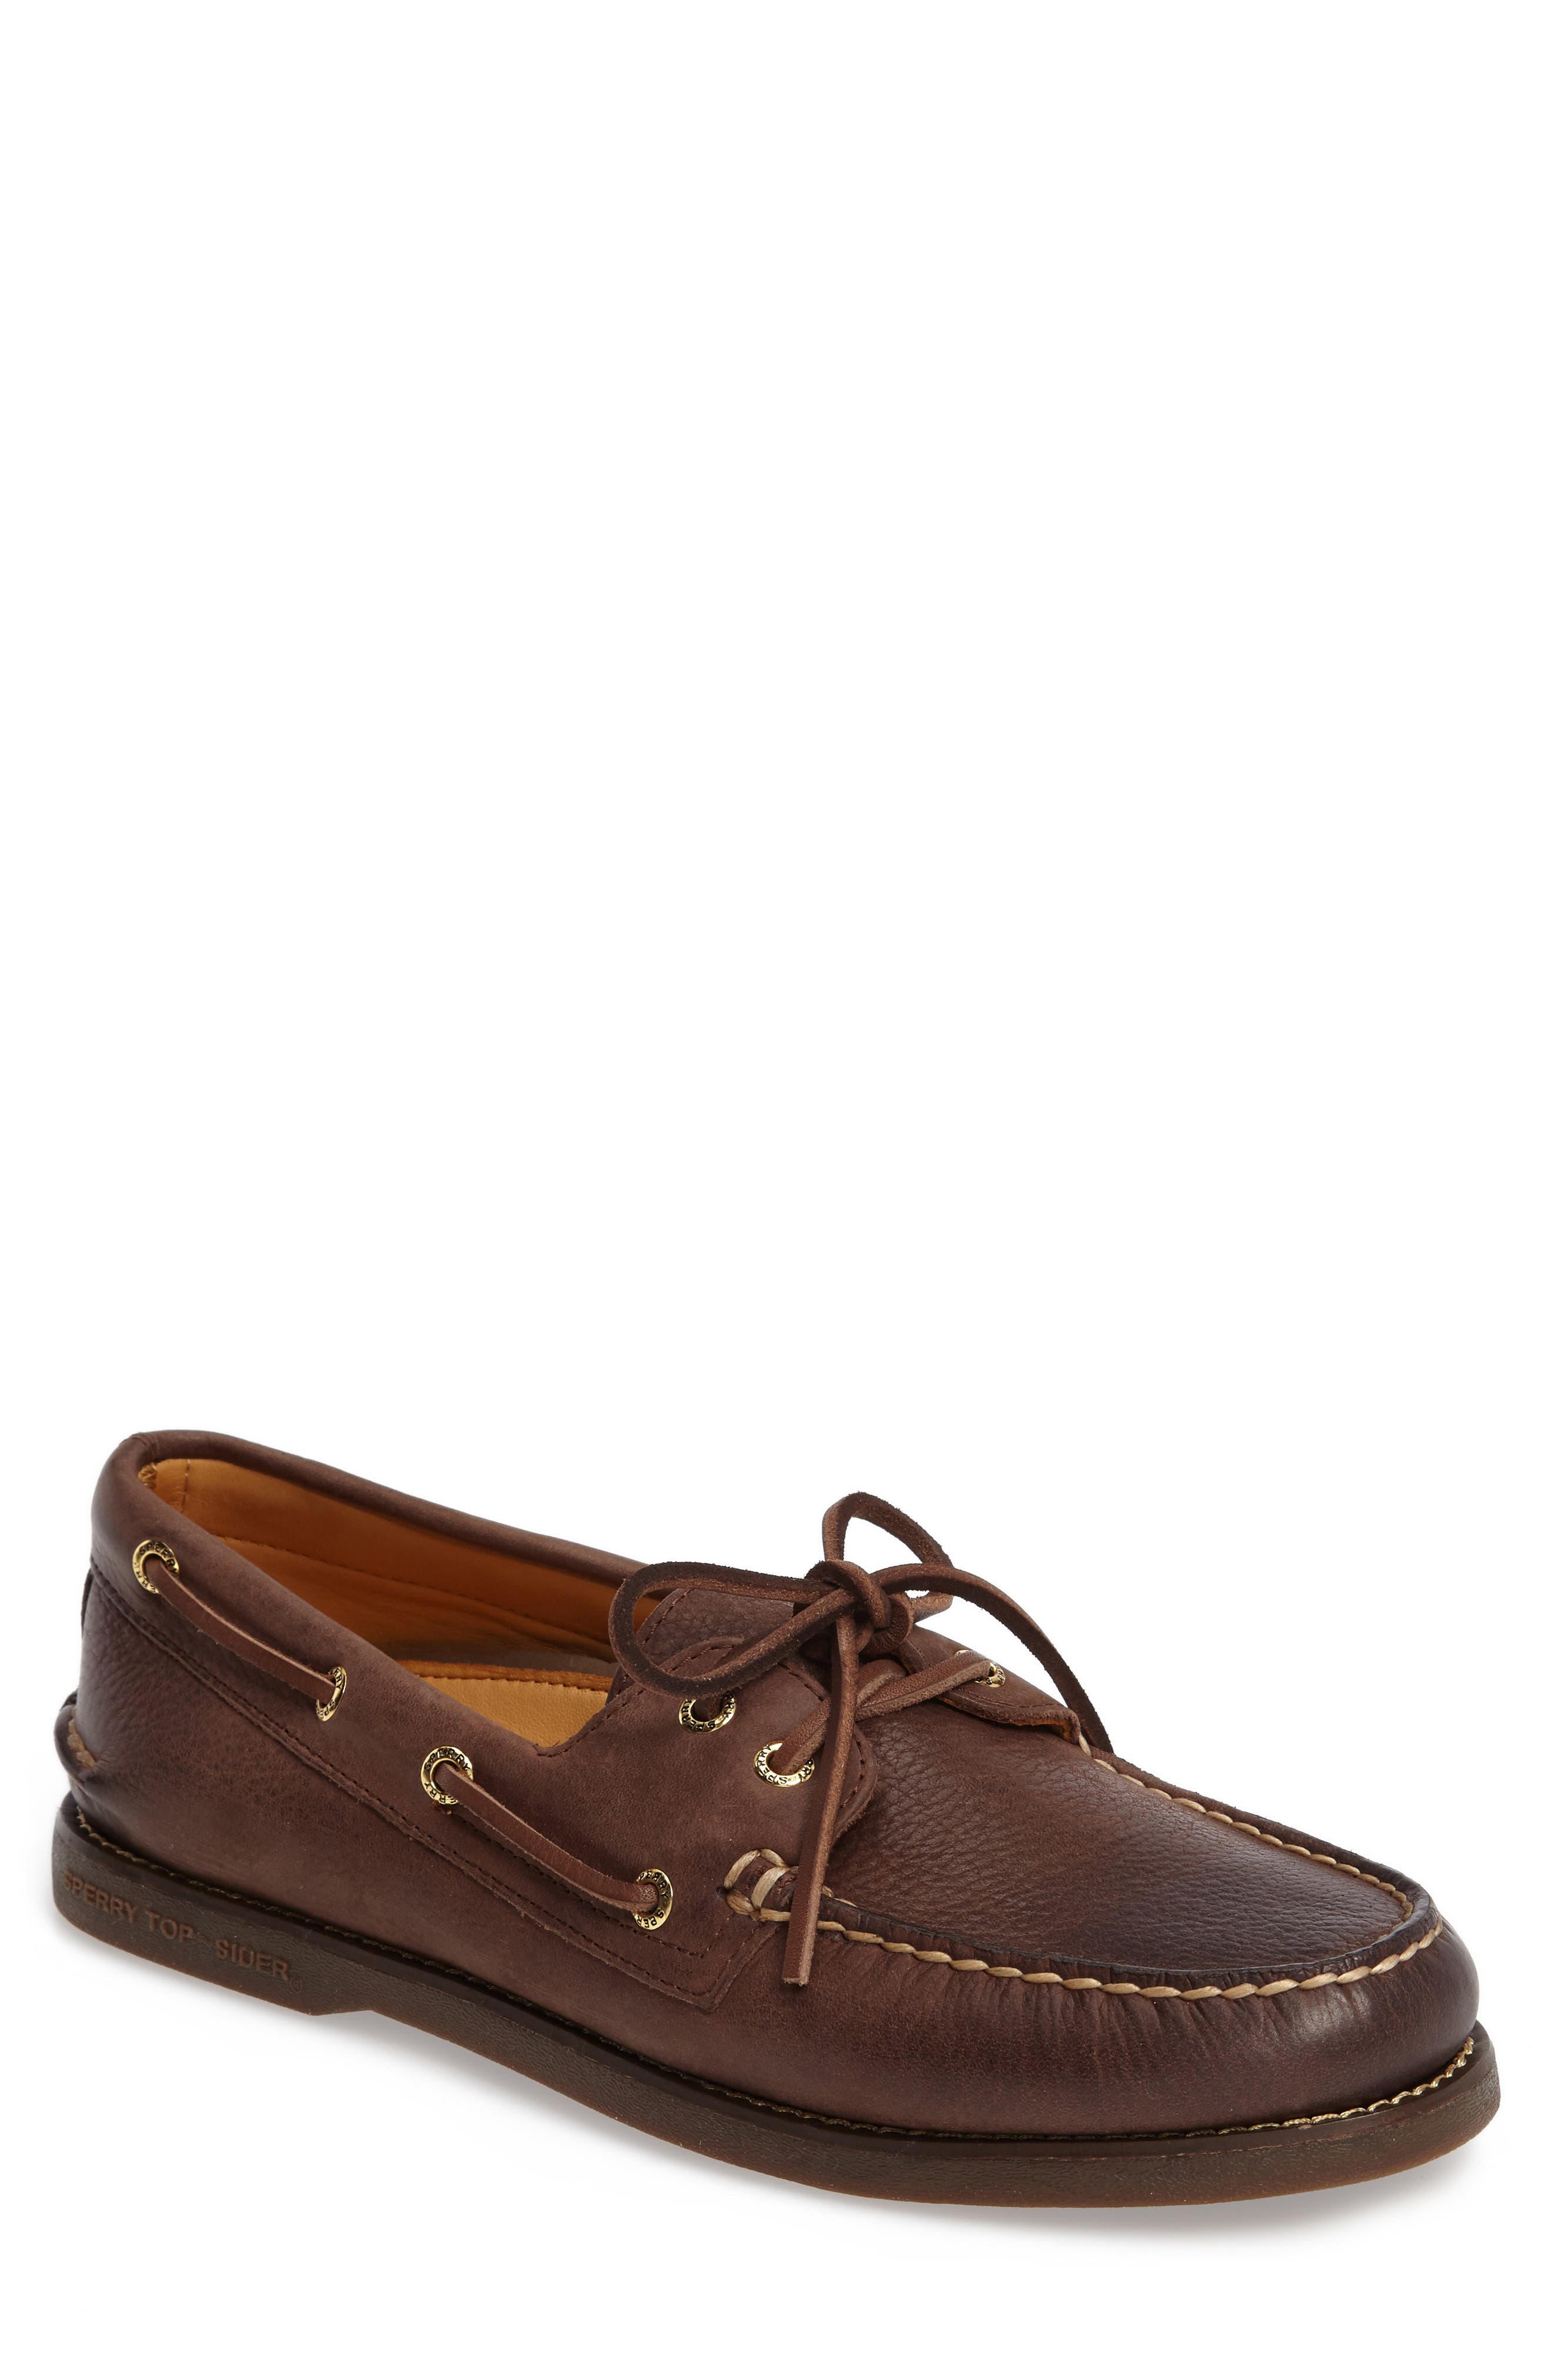 sperry shoes nordstrom